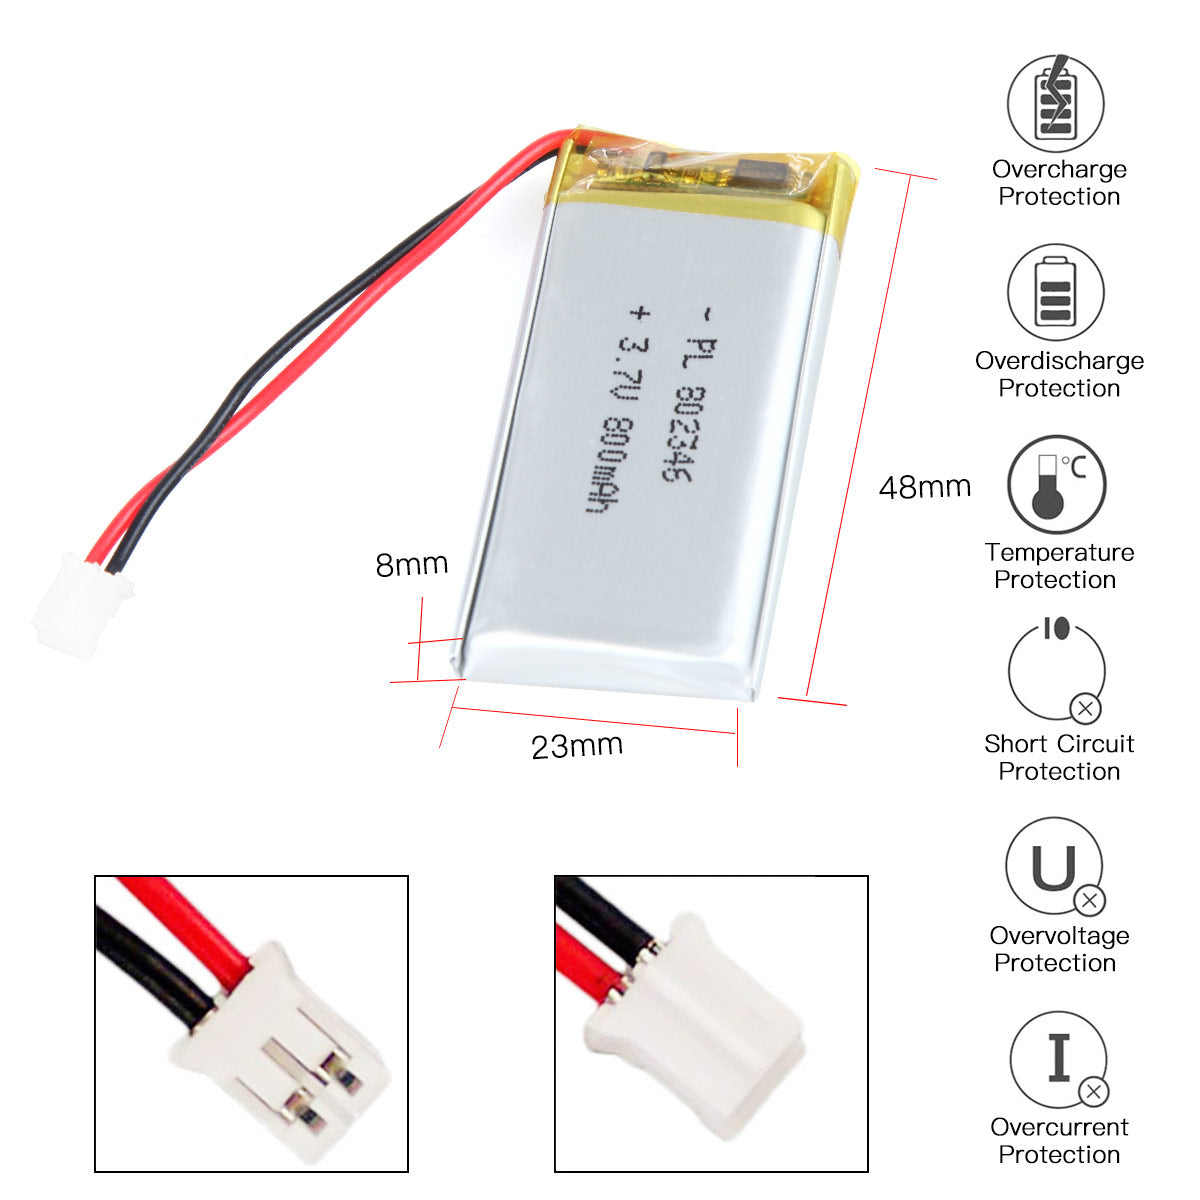 YDL 3.7V 800mAh 802346 Rechargeable Lipo Battery with JST Connector - YDL Battery